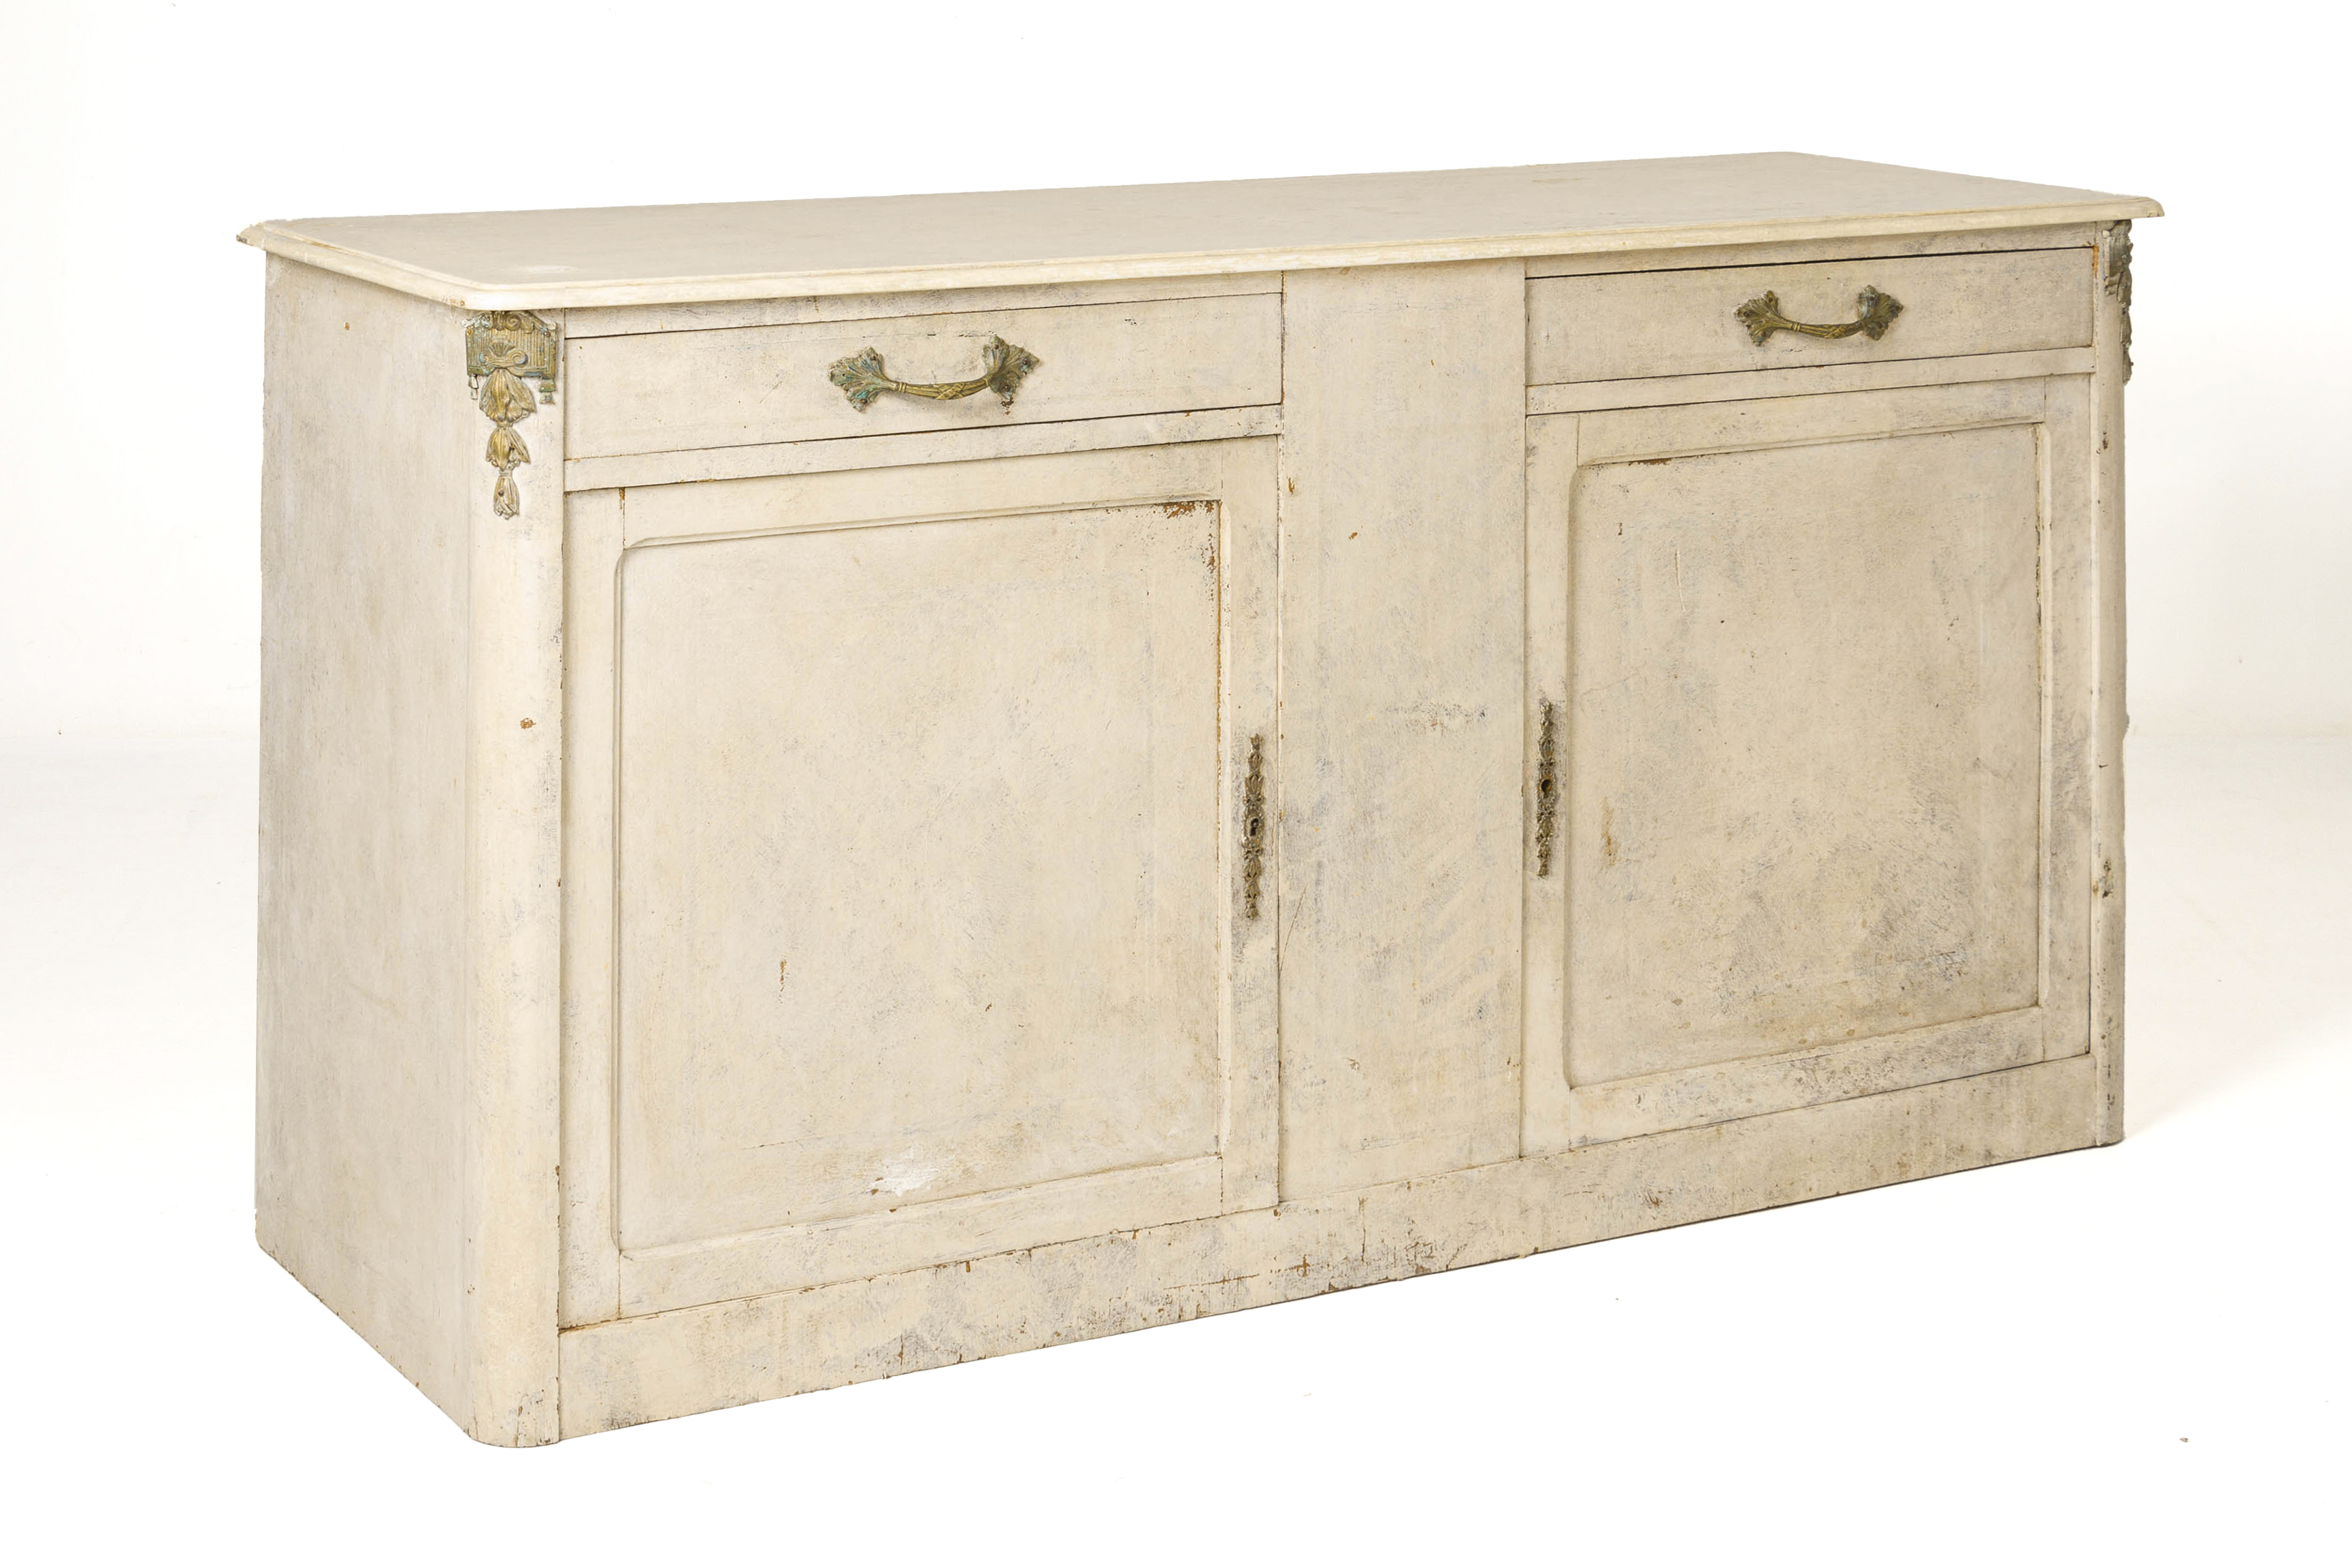 A WHITE PAINTED SIDE CABINET - Image 3 of 3